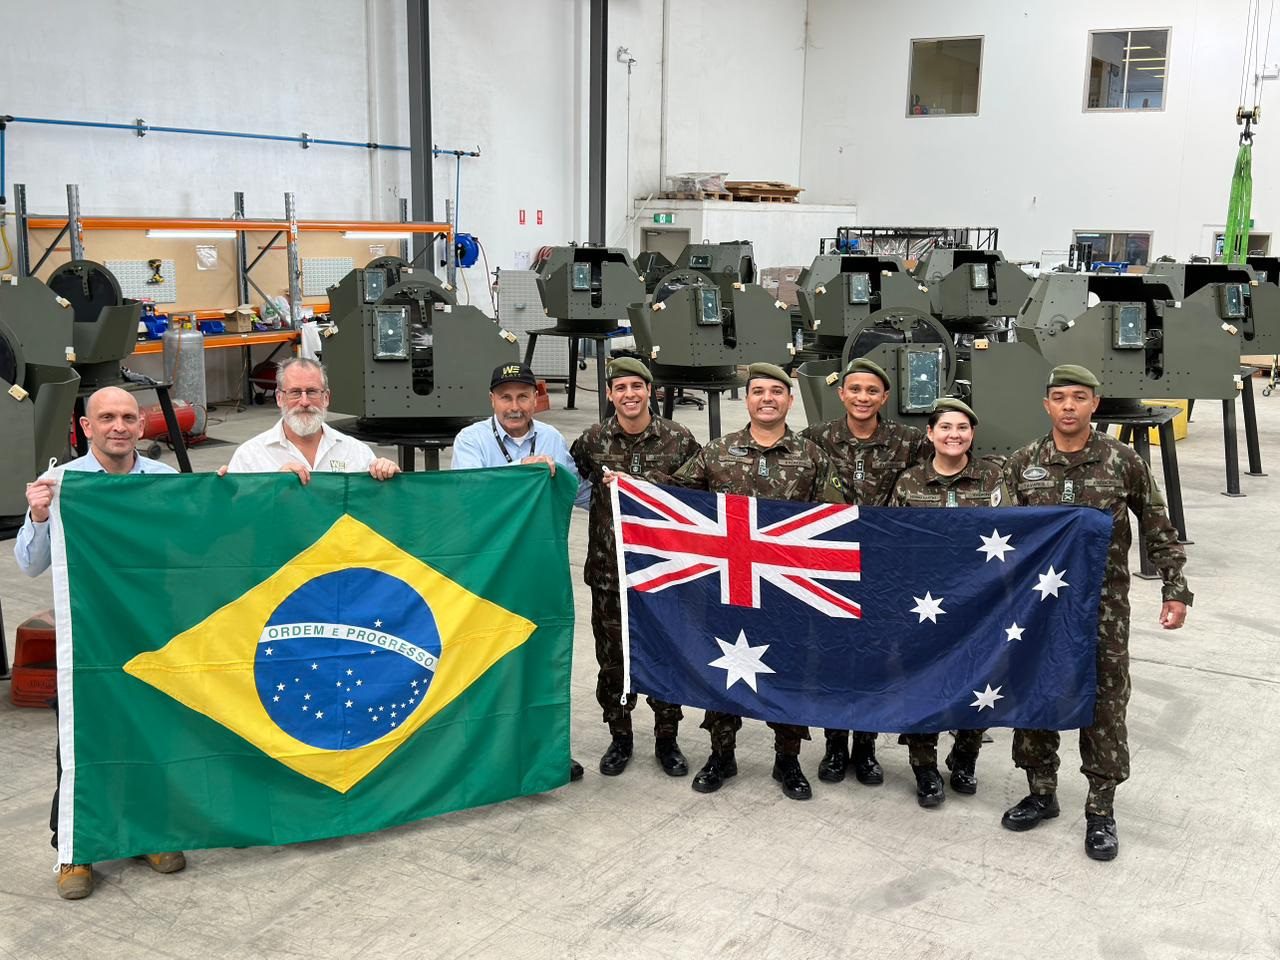 Ordnance experts conduct armored personnel carrier firing station assembly course in Australia